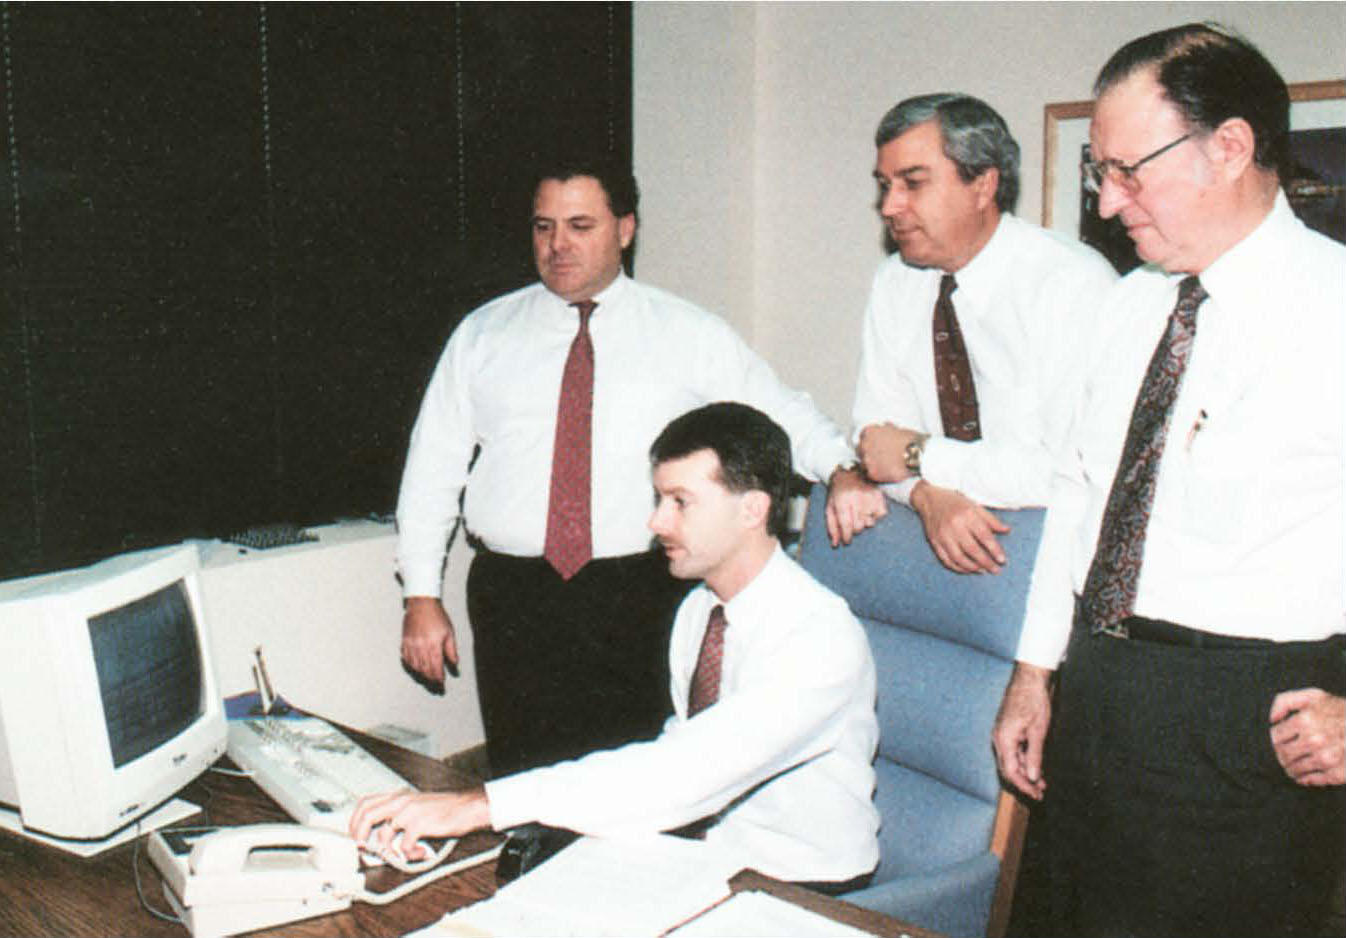 MiTek's History - Dave McQuinn and three men at a desk with late 1980s computer